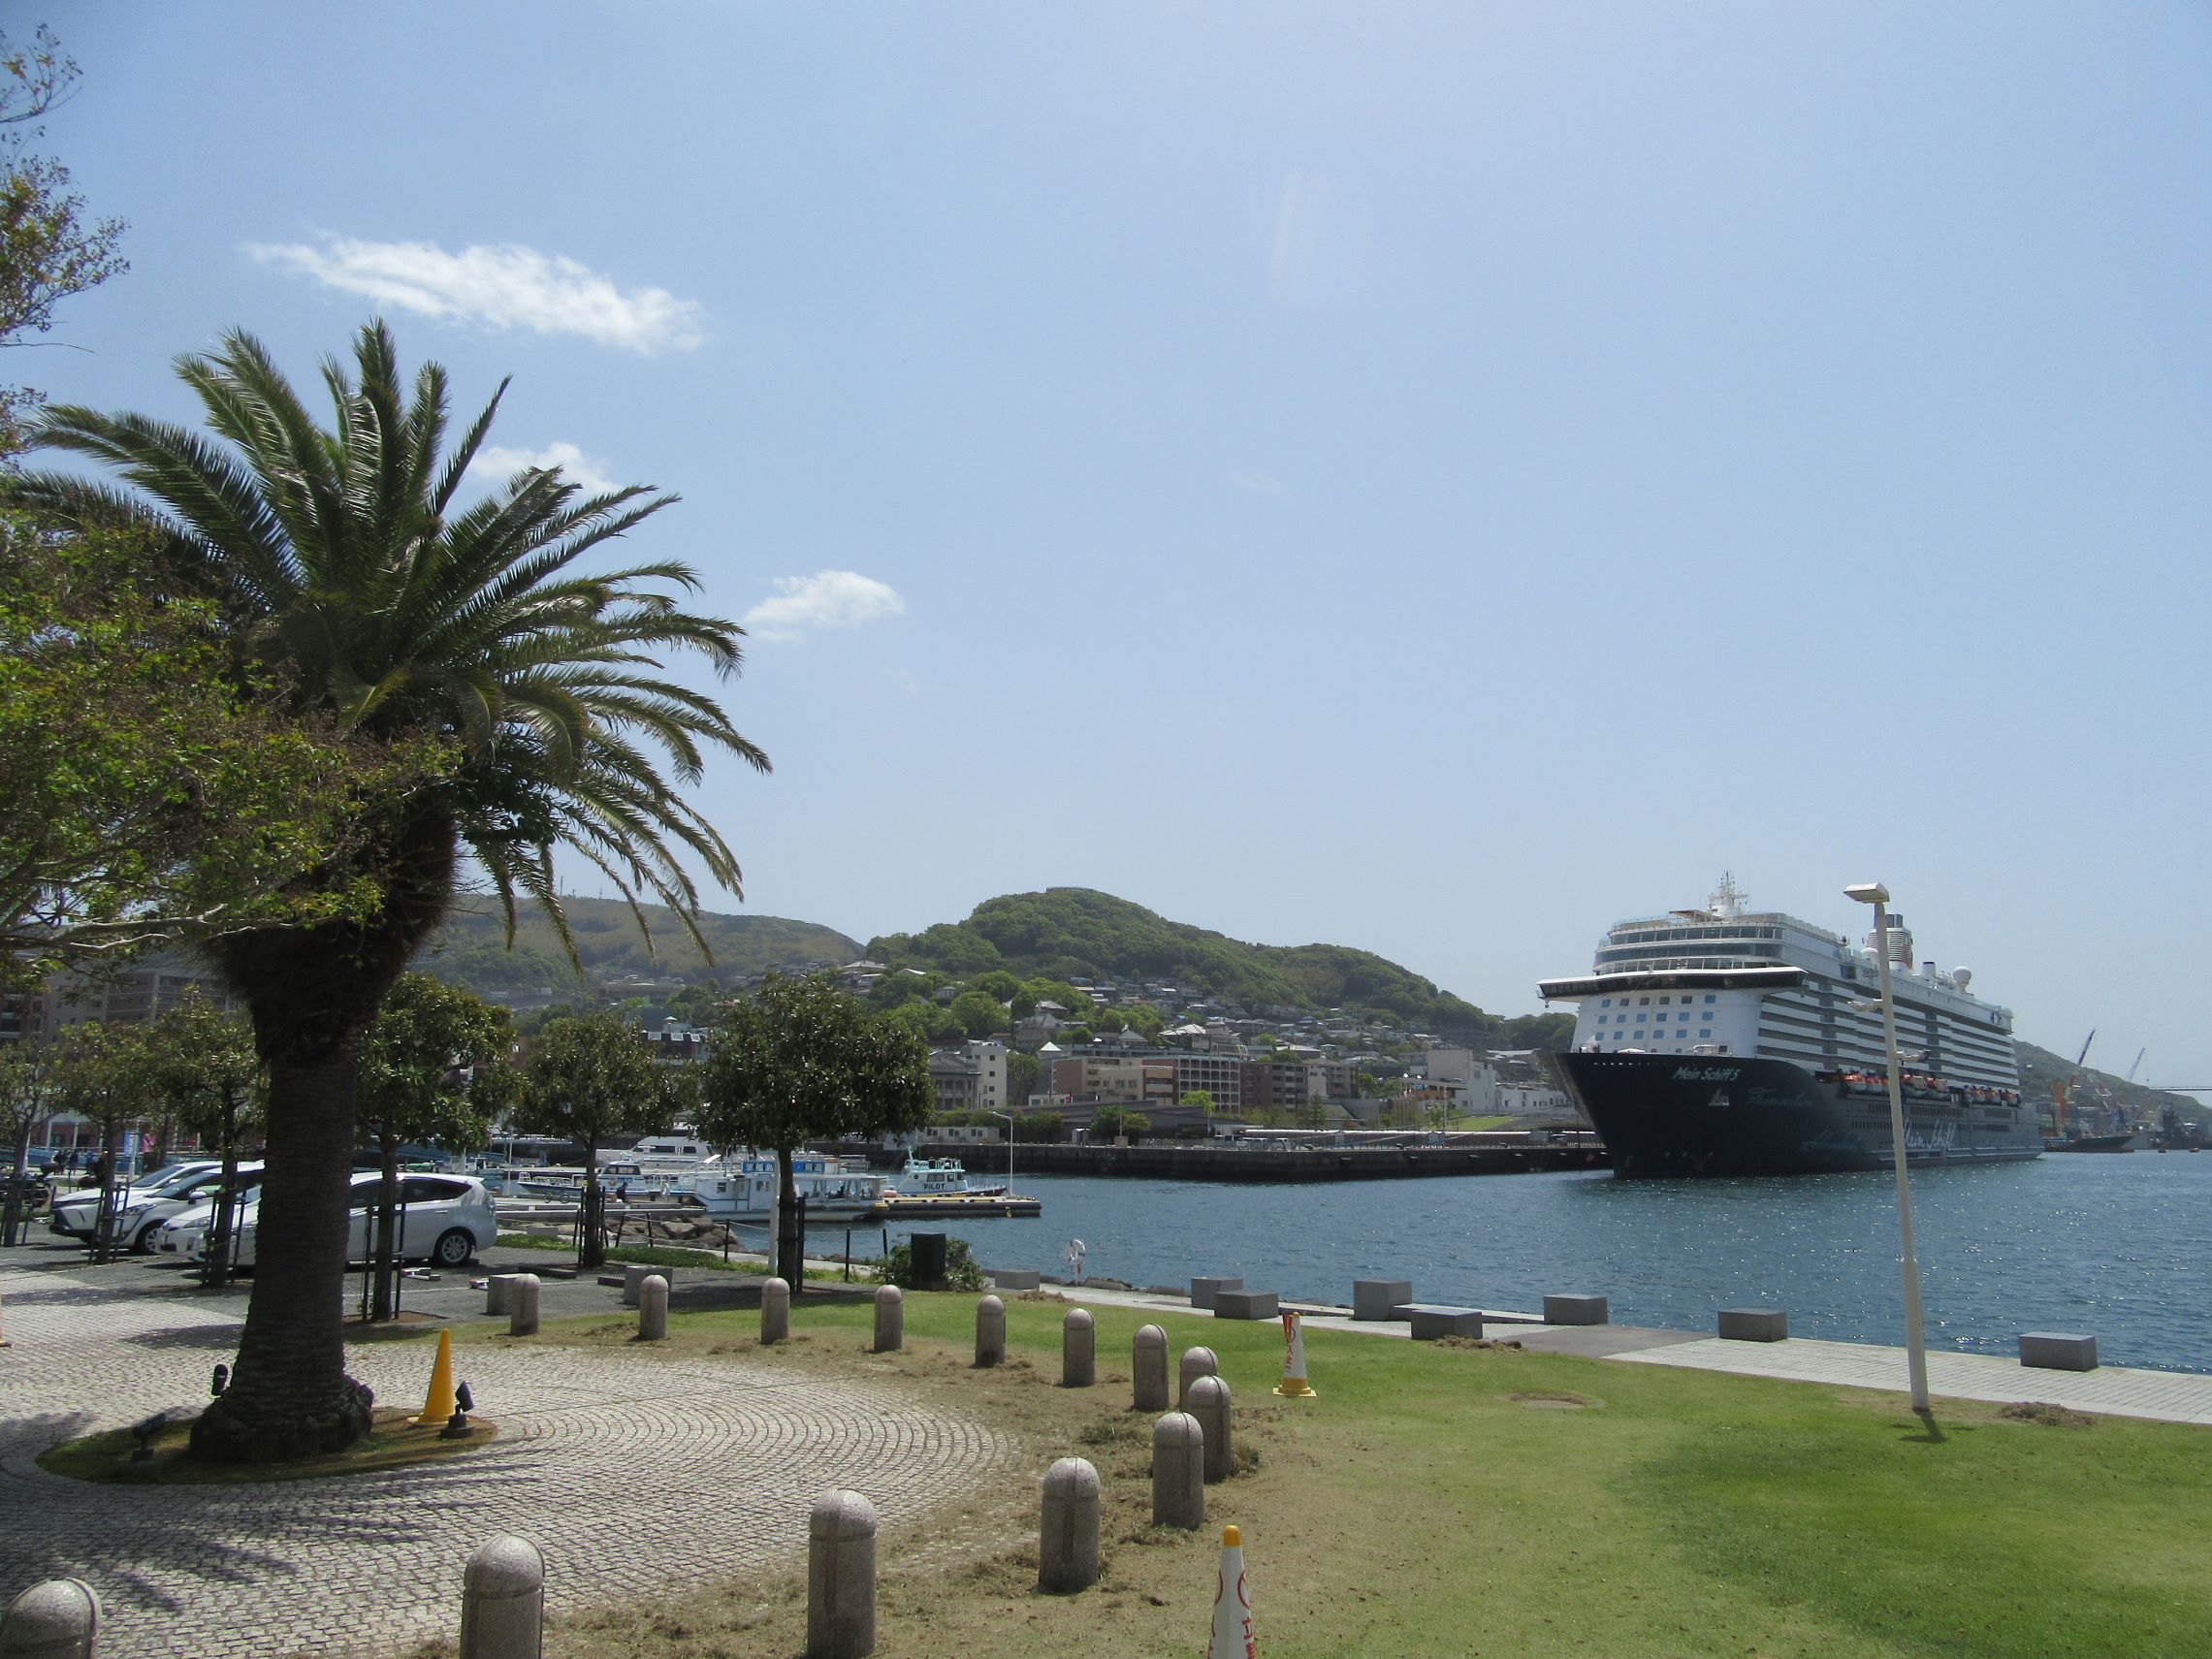 A park in Nagasaki by the sea, with a large cruise ship.